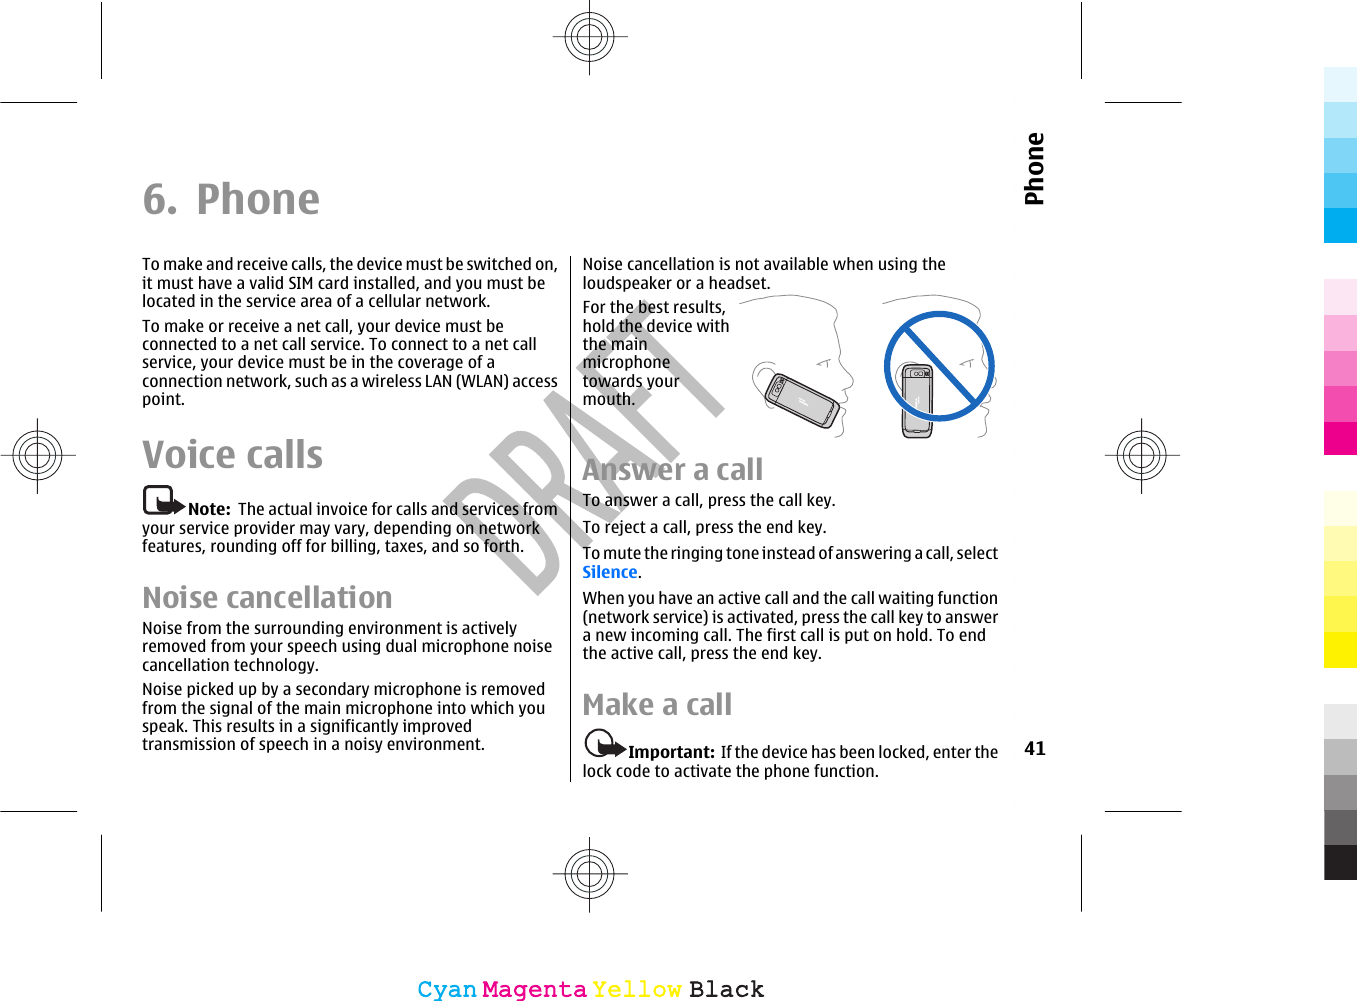 6. PhoneTo make and receive calls, the device must be switched on,it must have a valid SIM card installed, and you must belocated in the service area of a cellular network.To make or receive a net call, your device must beconnected to a net call service. To connect to a net callservice, your device must be in the coverage of aconnection network, such as a wireless LAN (WLAN) accesspoint.Voice callsNote:  The actual invoice for calls and services fromyour service provider may vary, depending on networkfeatures, rounding off for billing, taxes, and so forth.Noise cancellationNoise from the surrounding environment is activelyremoved from your speech using dual microphone noisecancellation technology.Noise picked up by a secondary microphone is removedfrom the signal of the main microphone into which youspeak. This results in a significantly improvedtransmission of speech in a noisy environment.Noise cancellation is not available when using theloudspeaker or a headset.For the best results,hold the device withthe mainmicrophonetowards yourmouth.Answer a callTo answer a call, press the call key.To reject a call, press the end key.To mute the ringing tone instead of answering a call, selectSilence.When you have an active call and the call waiting function(network service) is activated, press the call key to answera new incoming call. The first call is put on hold. To endthe active call, press the end key.Make a callImportant:  If the device has been locked, enter thelock code to activate the phone function.41PhoneCyanCyanMagentaMagentaYellowYellowBlackBlack